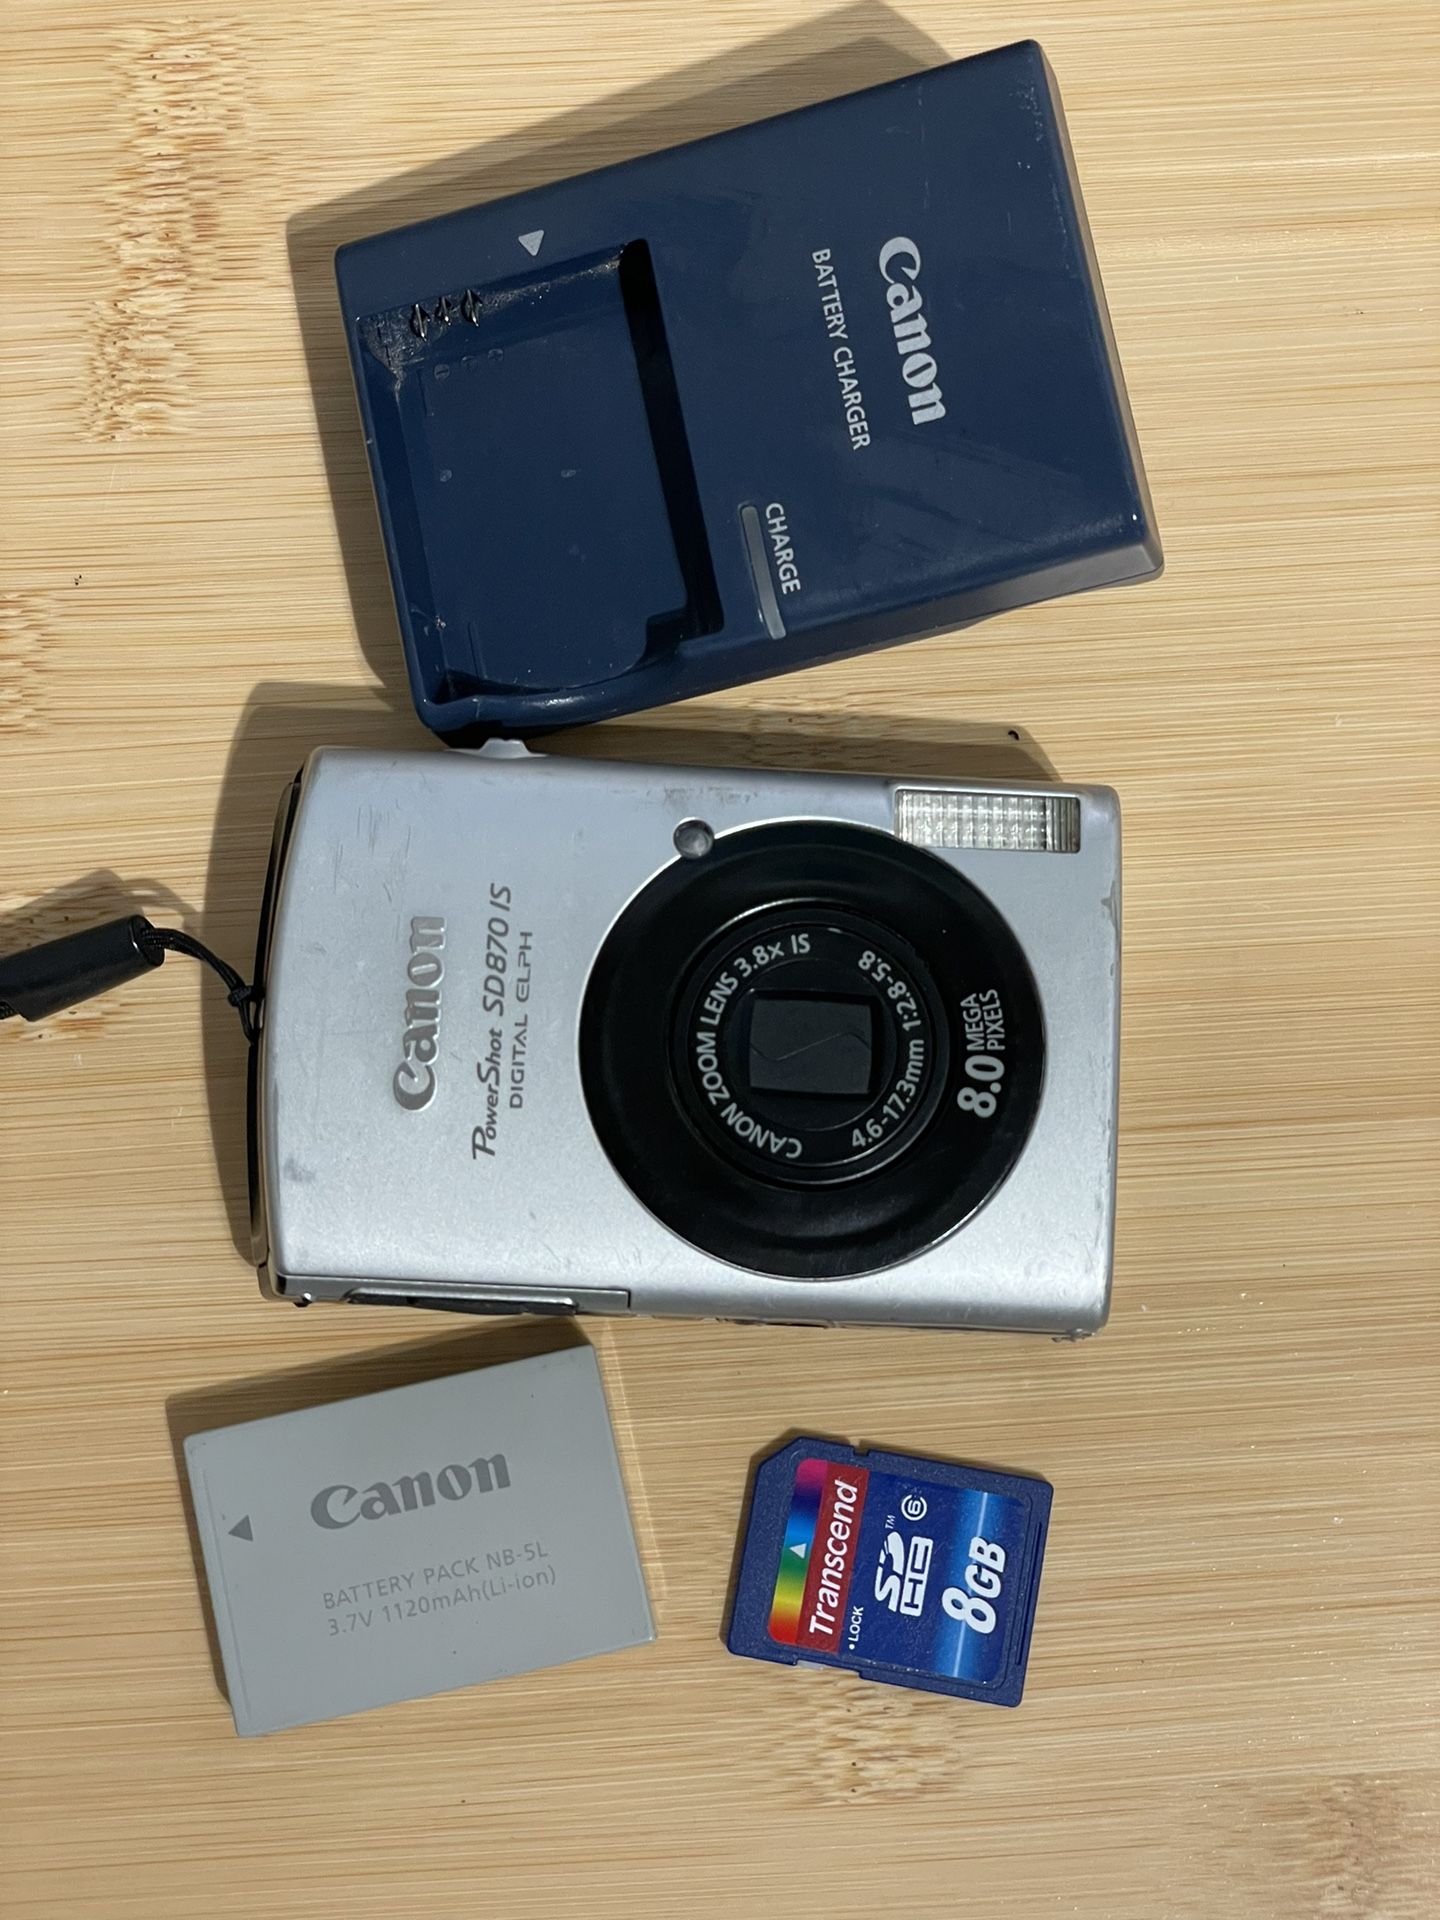 Canon Powershot SD870 IS ELPH Digital Camera - Tested Works  Flash zoom video photo all working. Charger, battery and memory card included. Has cosmet